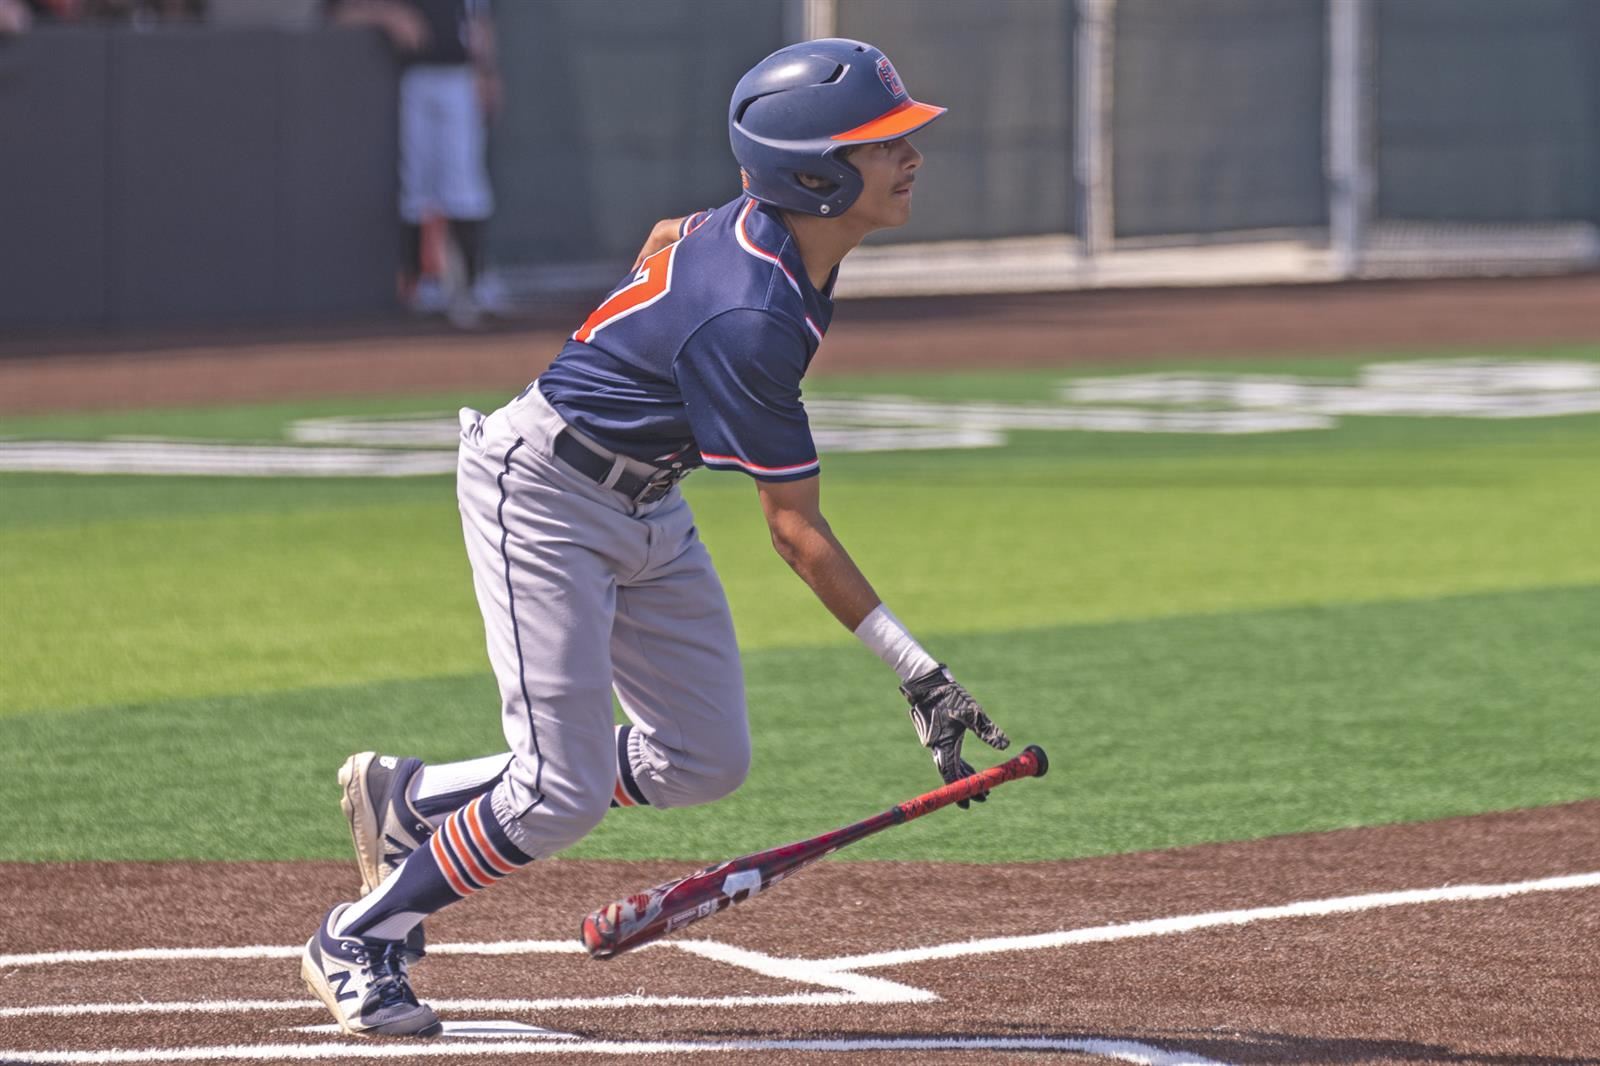 Bridgeland senior Rene Garcia was among the student-athletes named to the 16-6A Academic All-District Baseball Team.